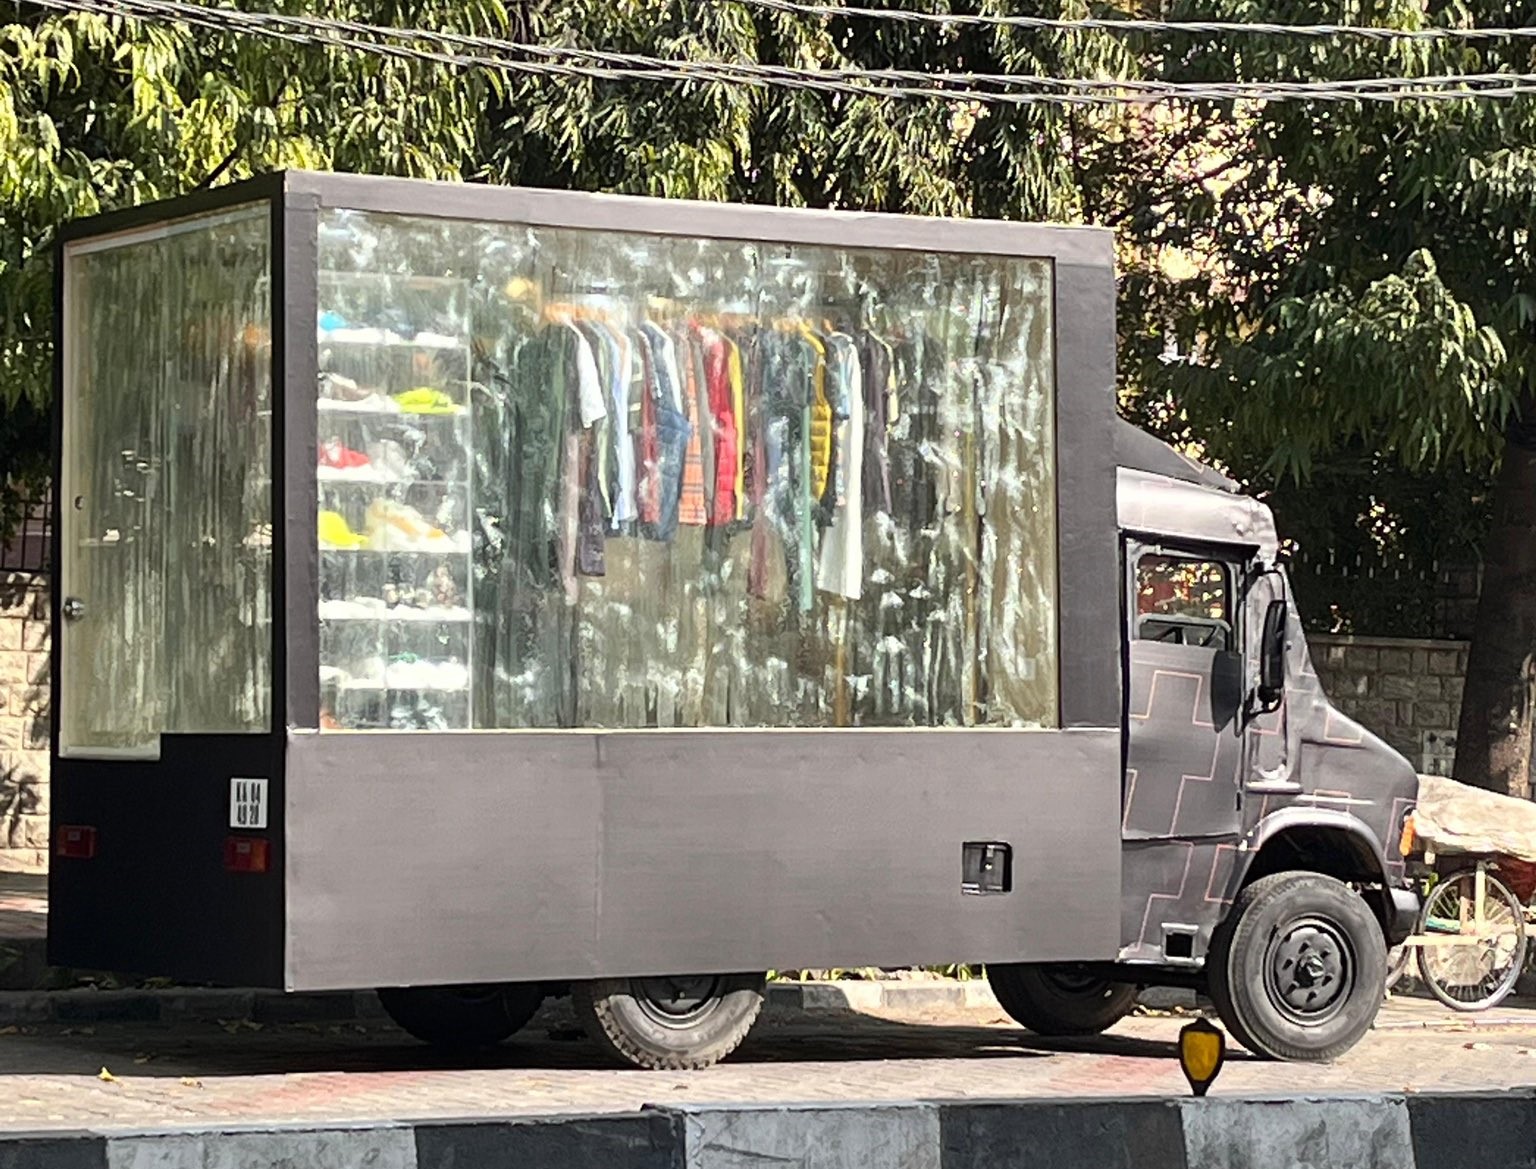 Truck selling clothes seen in Bengaluru 